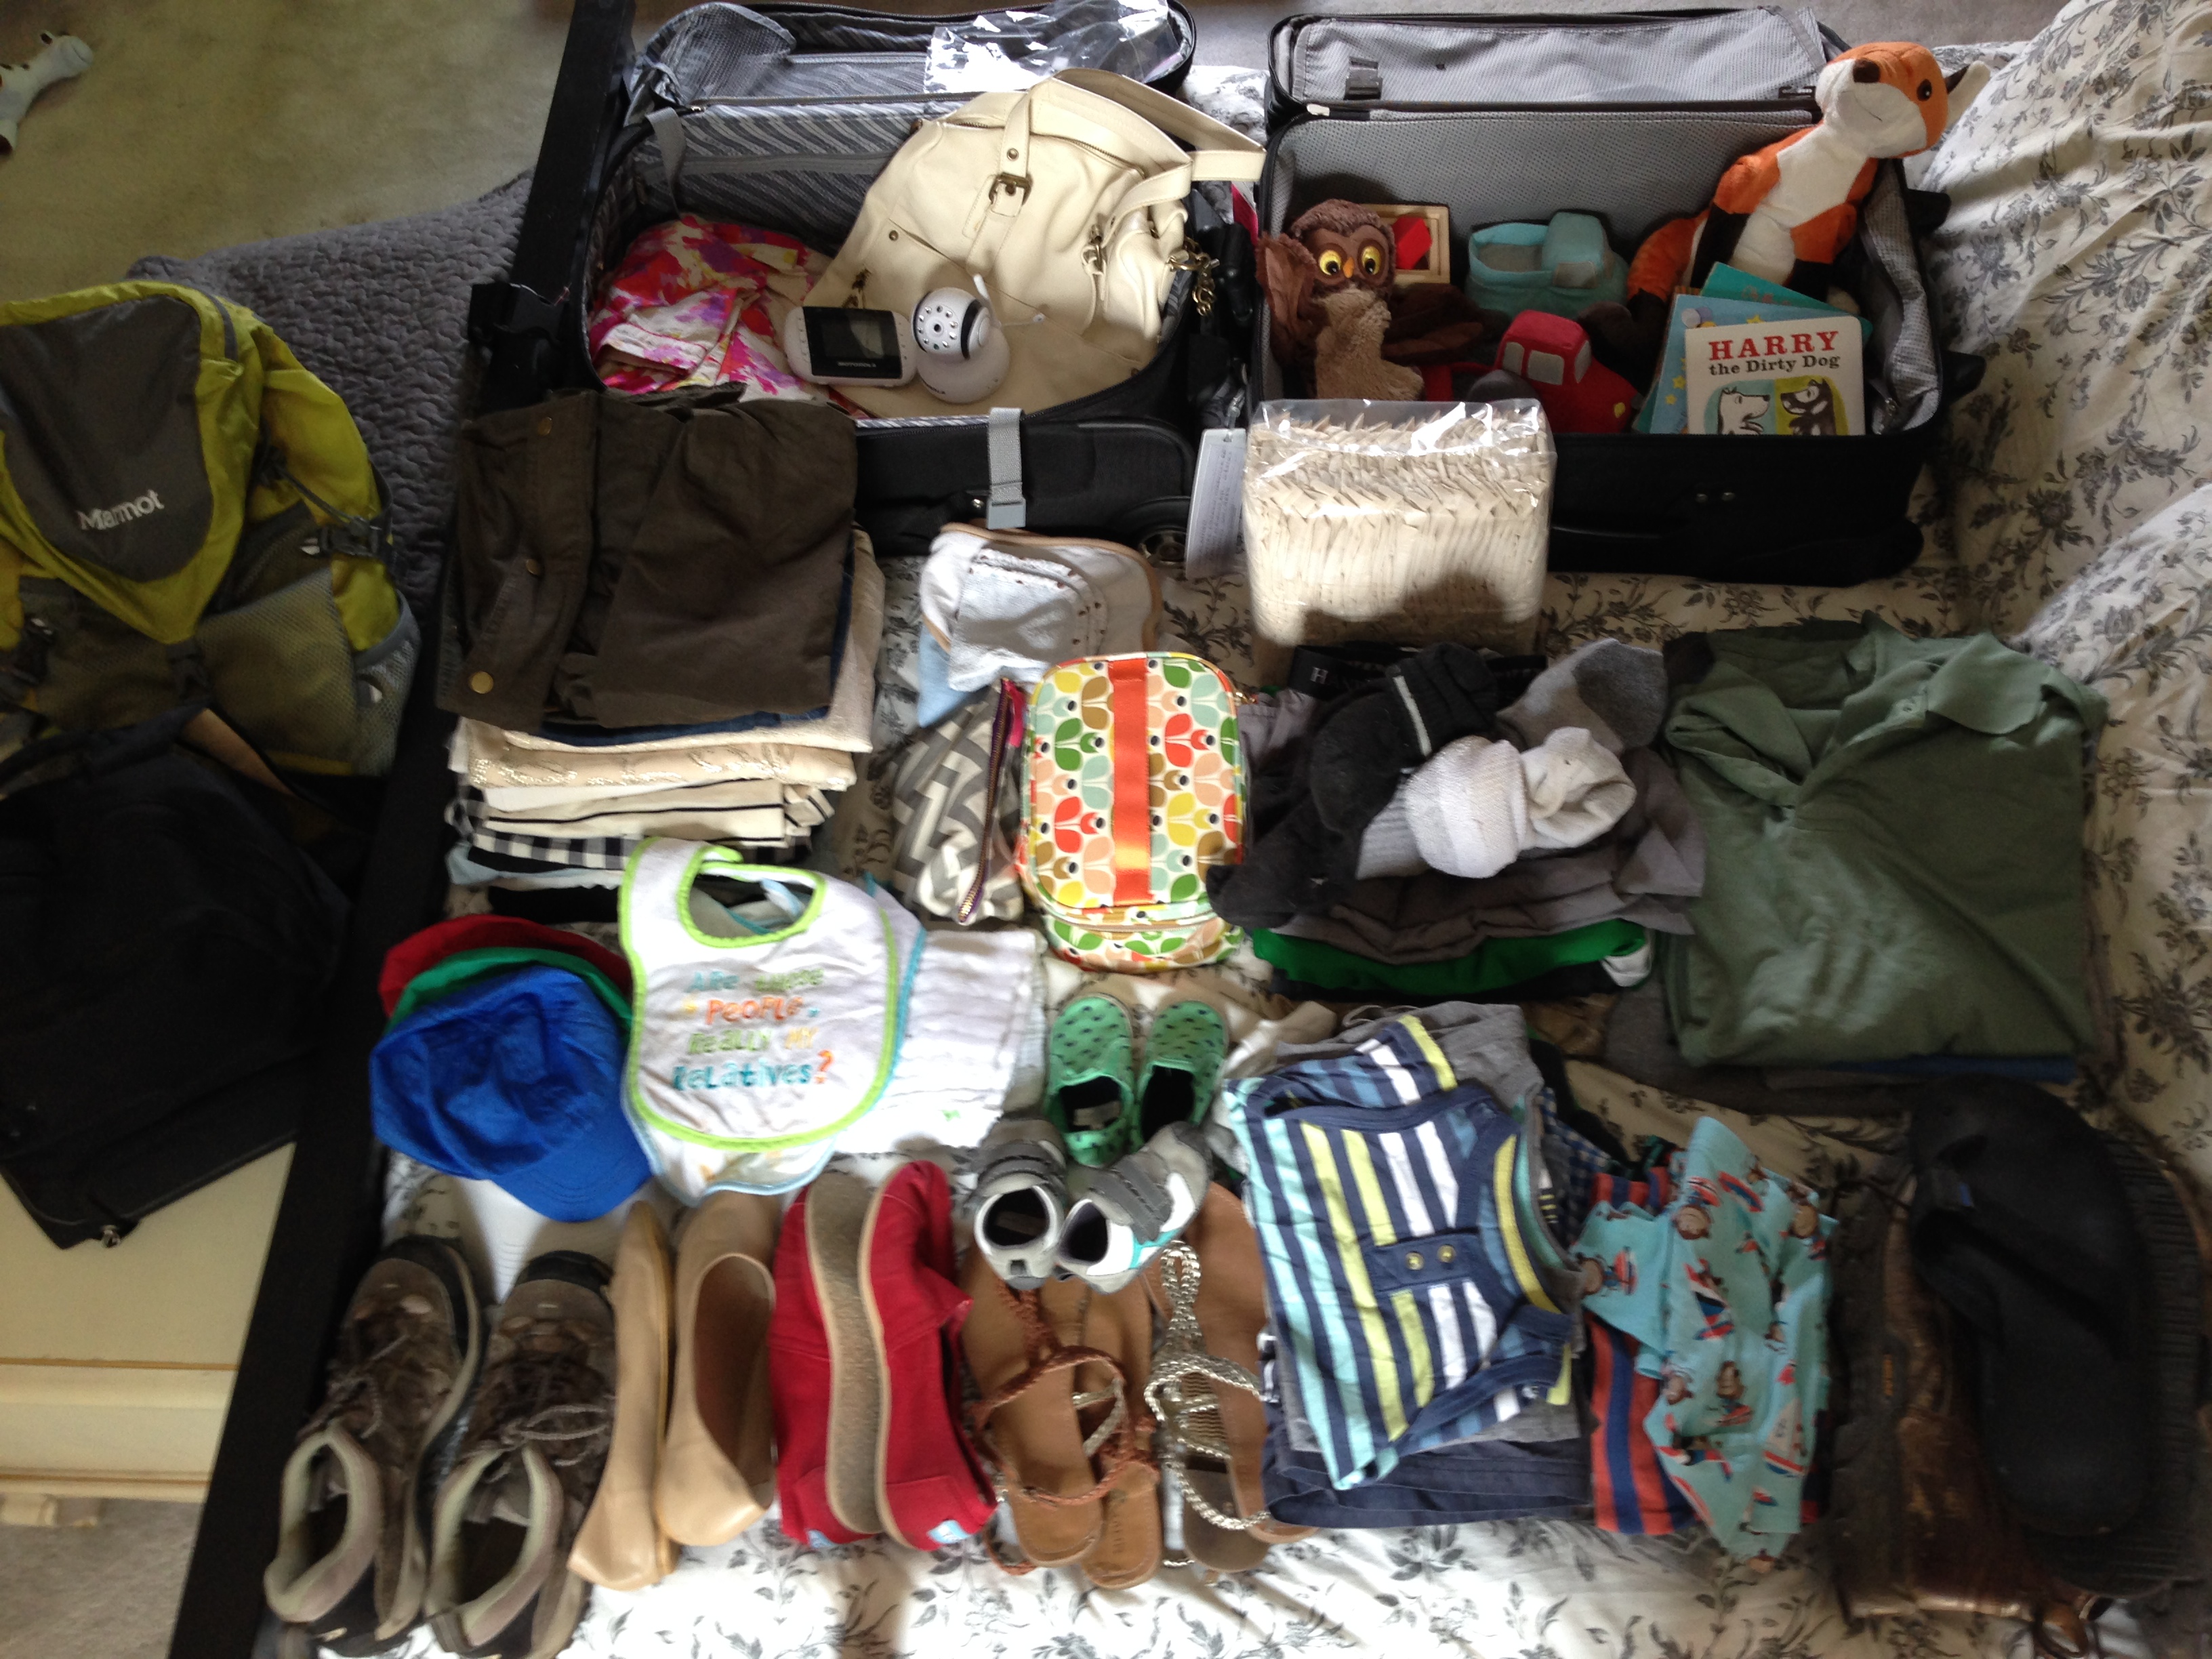 Air Travel With an [Almost] 1 Year Old: Part 1, Packing Light Ideas